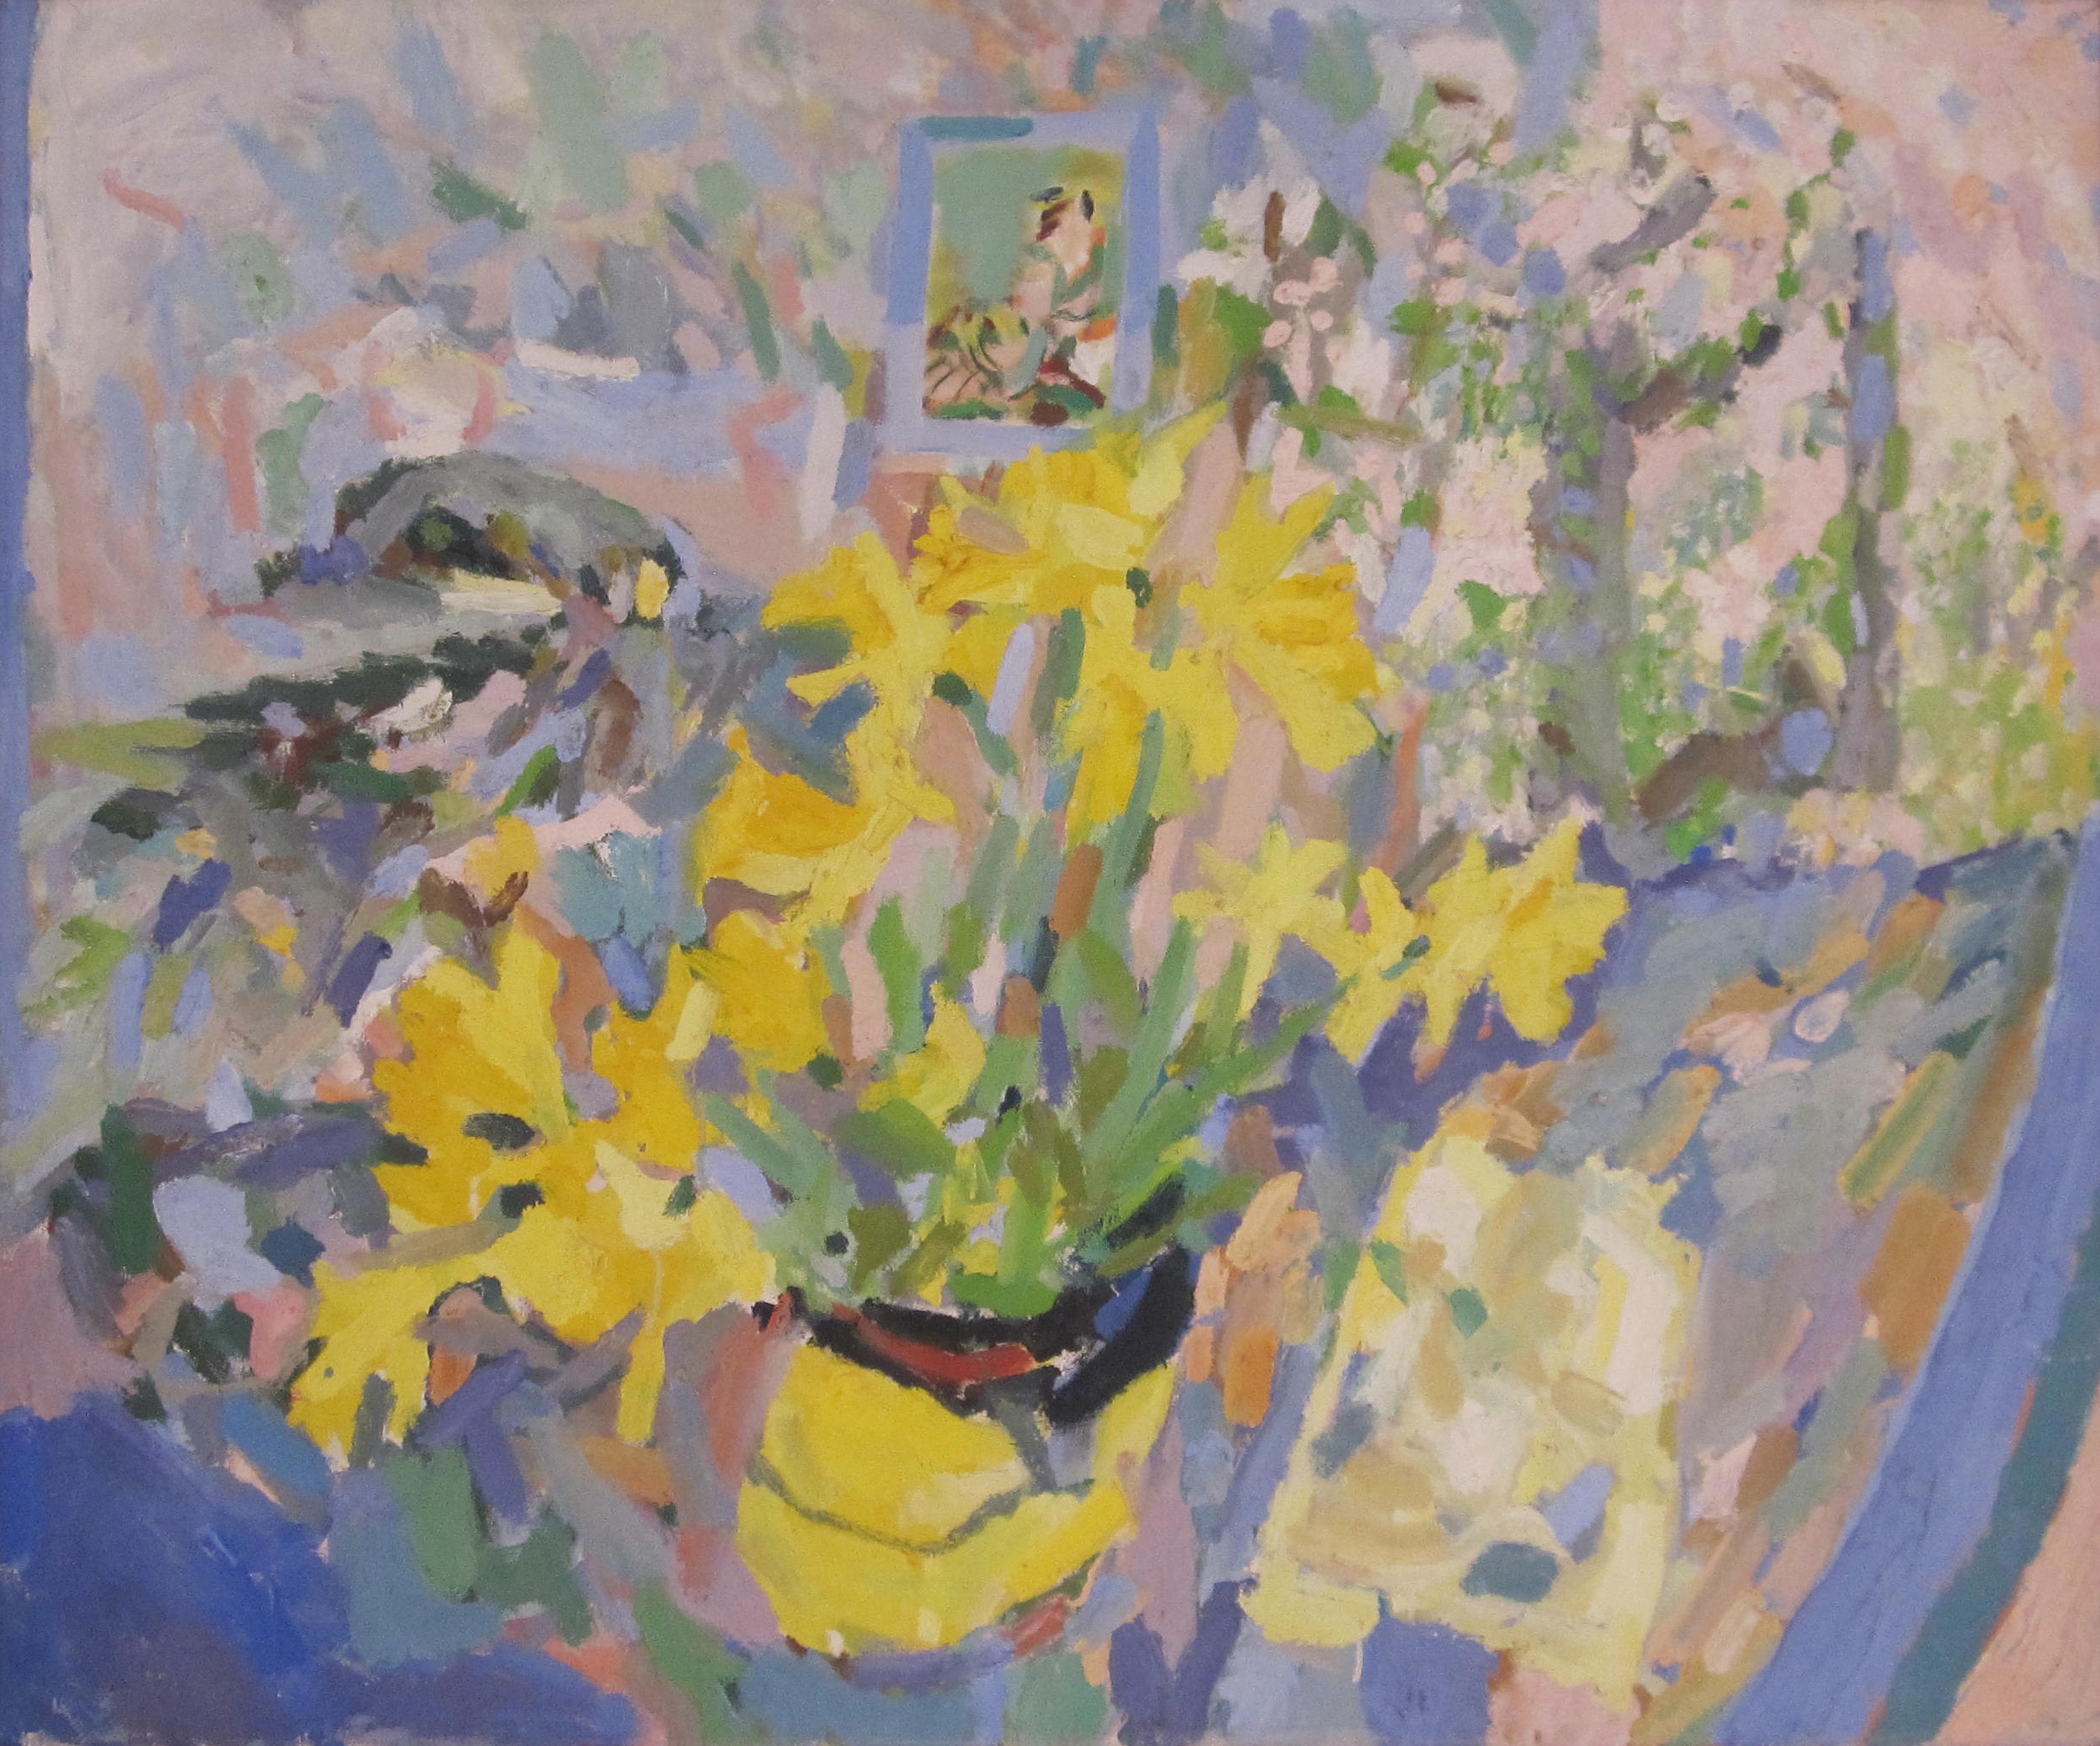 British Contemporary oil painting of Daffodils by artist Rosie Montford